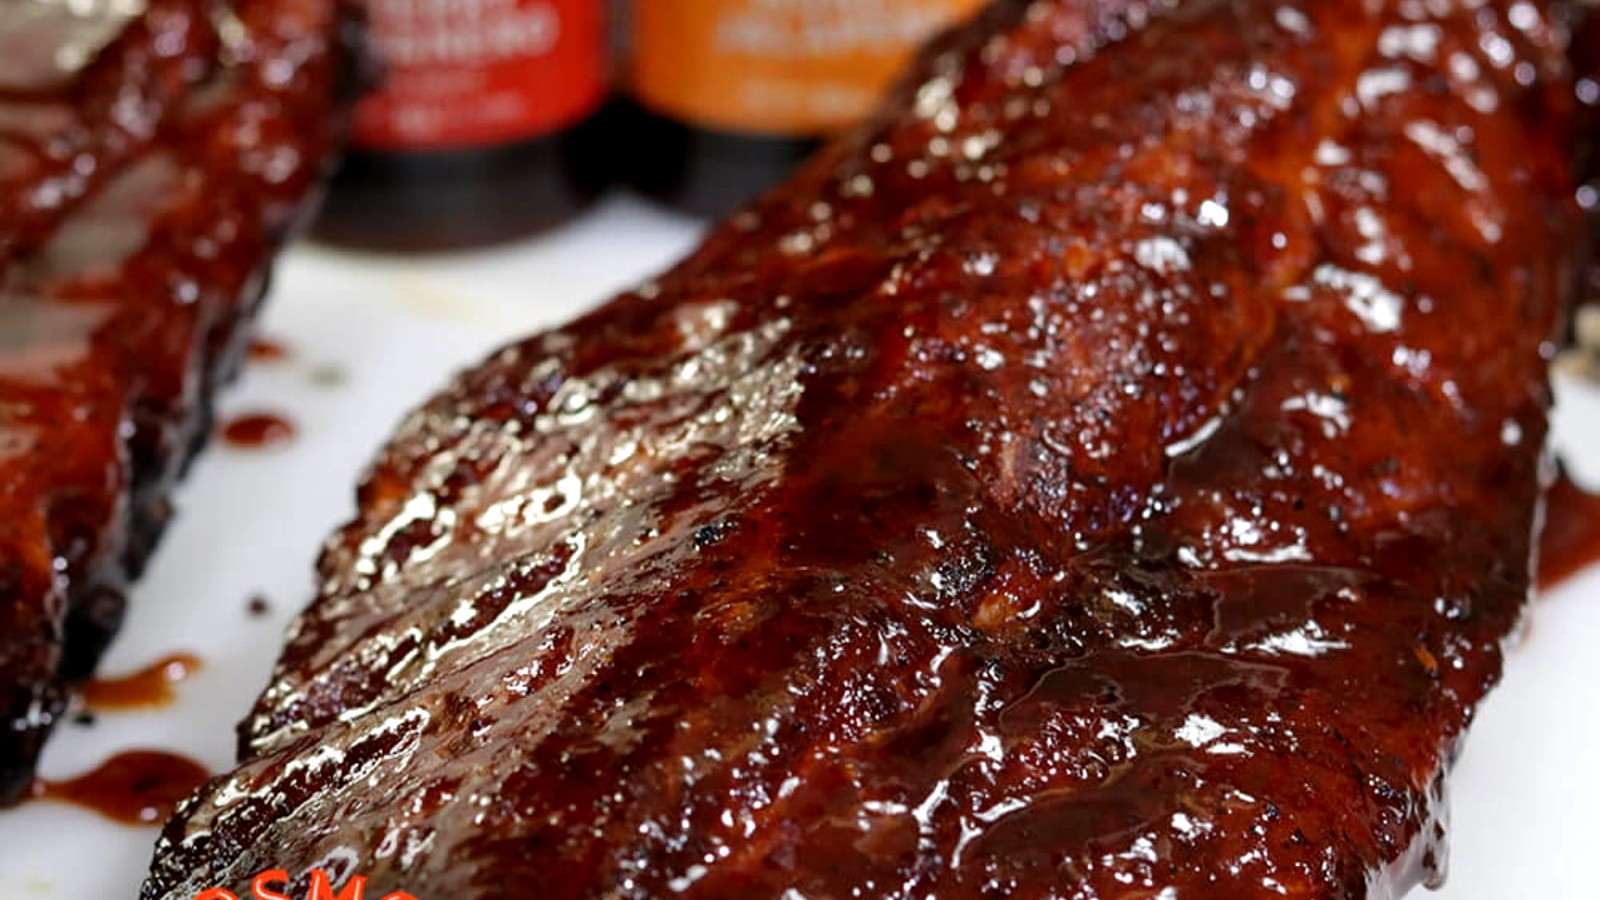 Image of 9 Slabs of Baby Back Ribs on the PBC